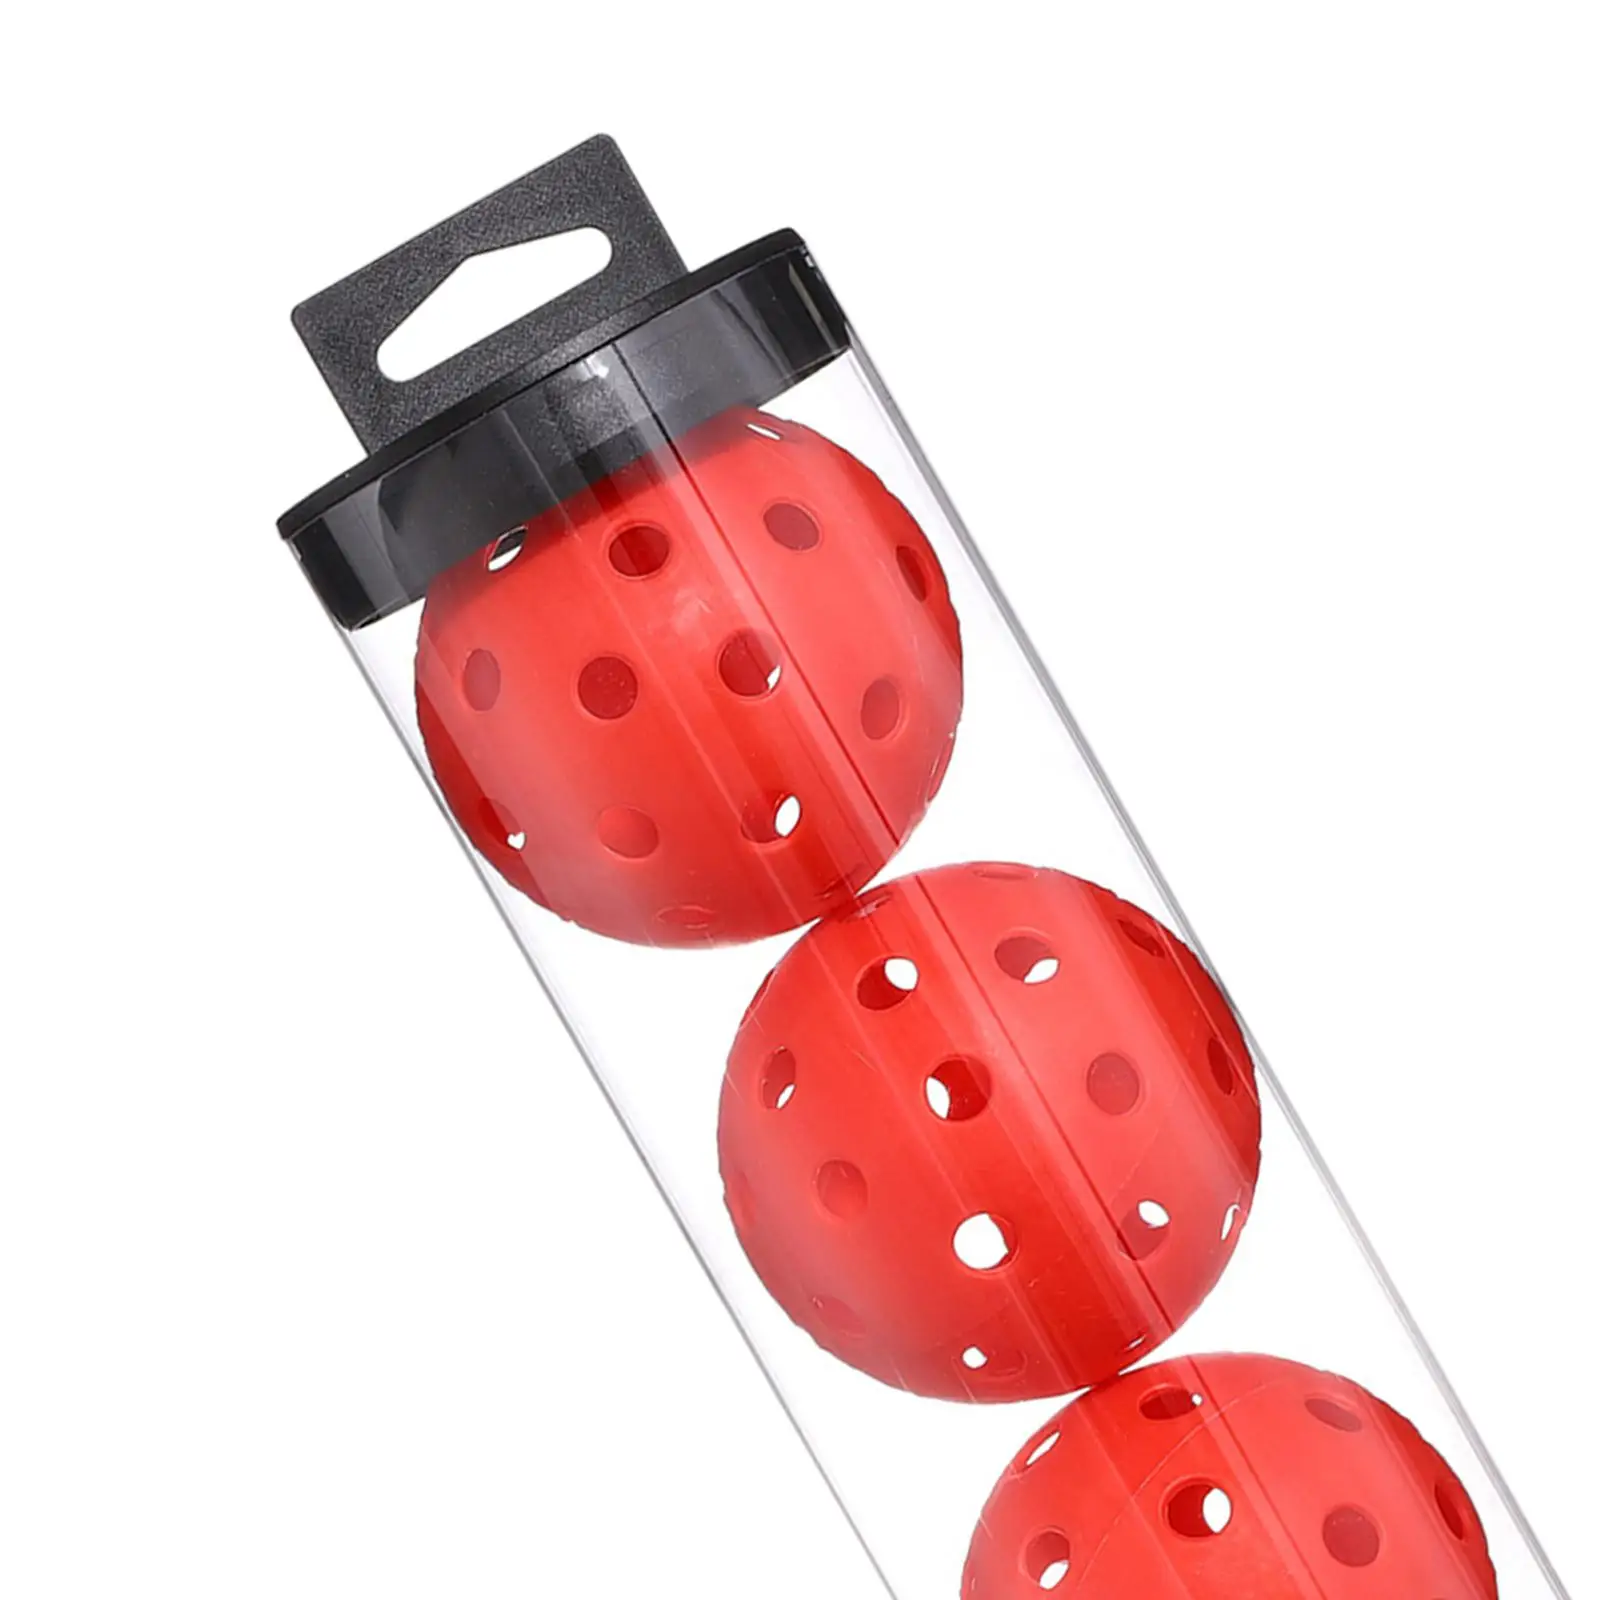 4Pcs Pickleball Balls with 40 Small Precisely Drilled Holes Durable Standard